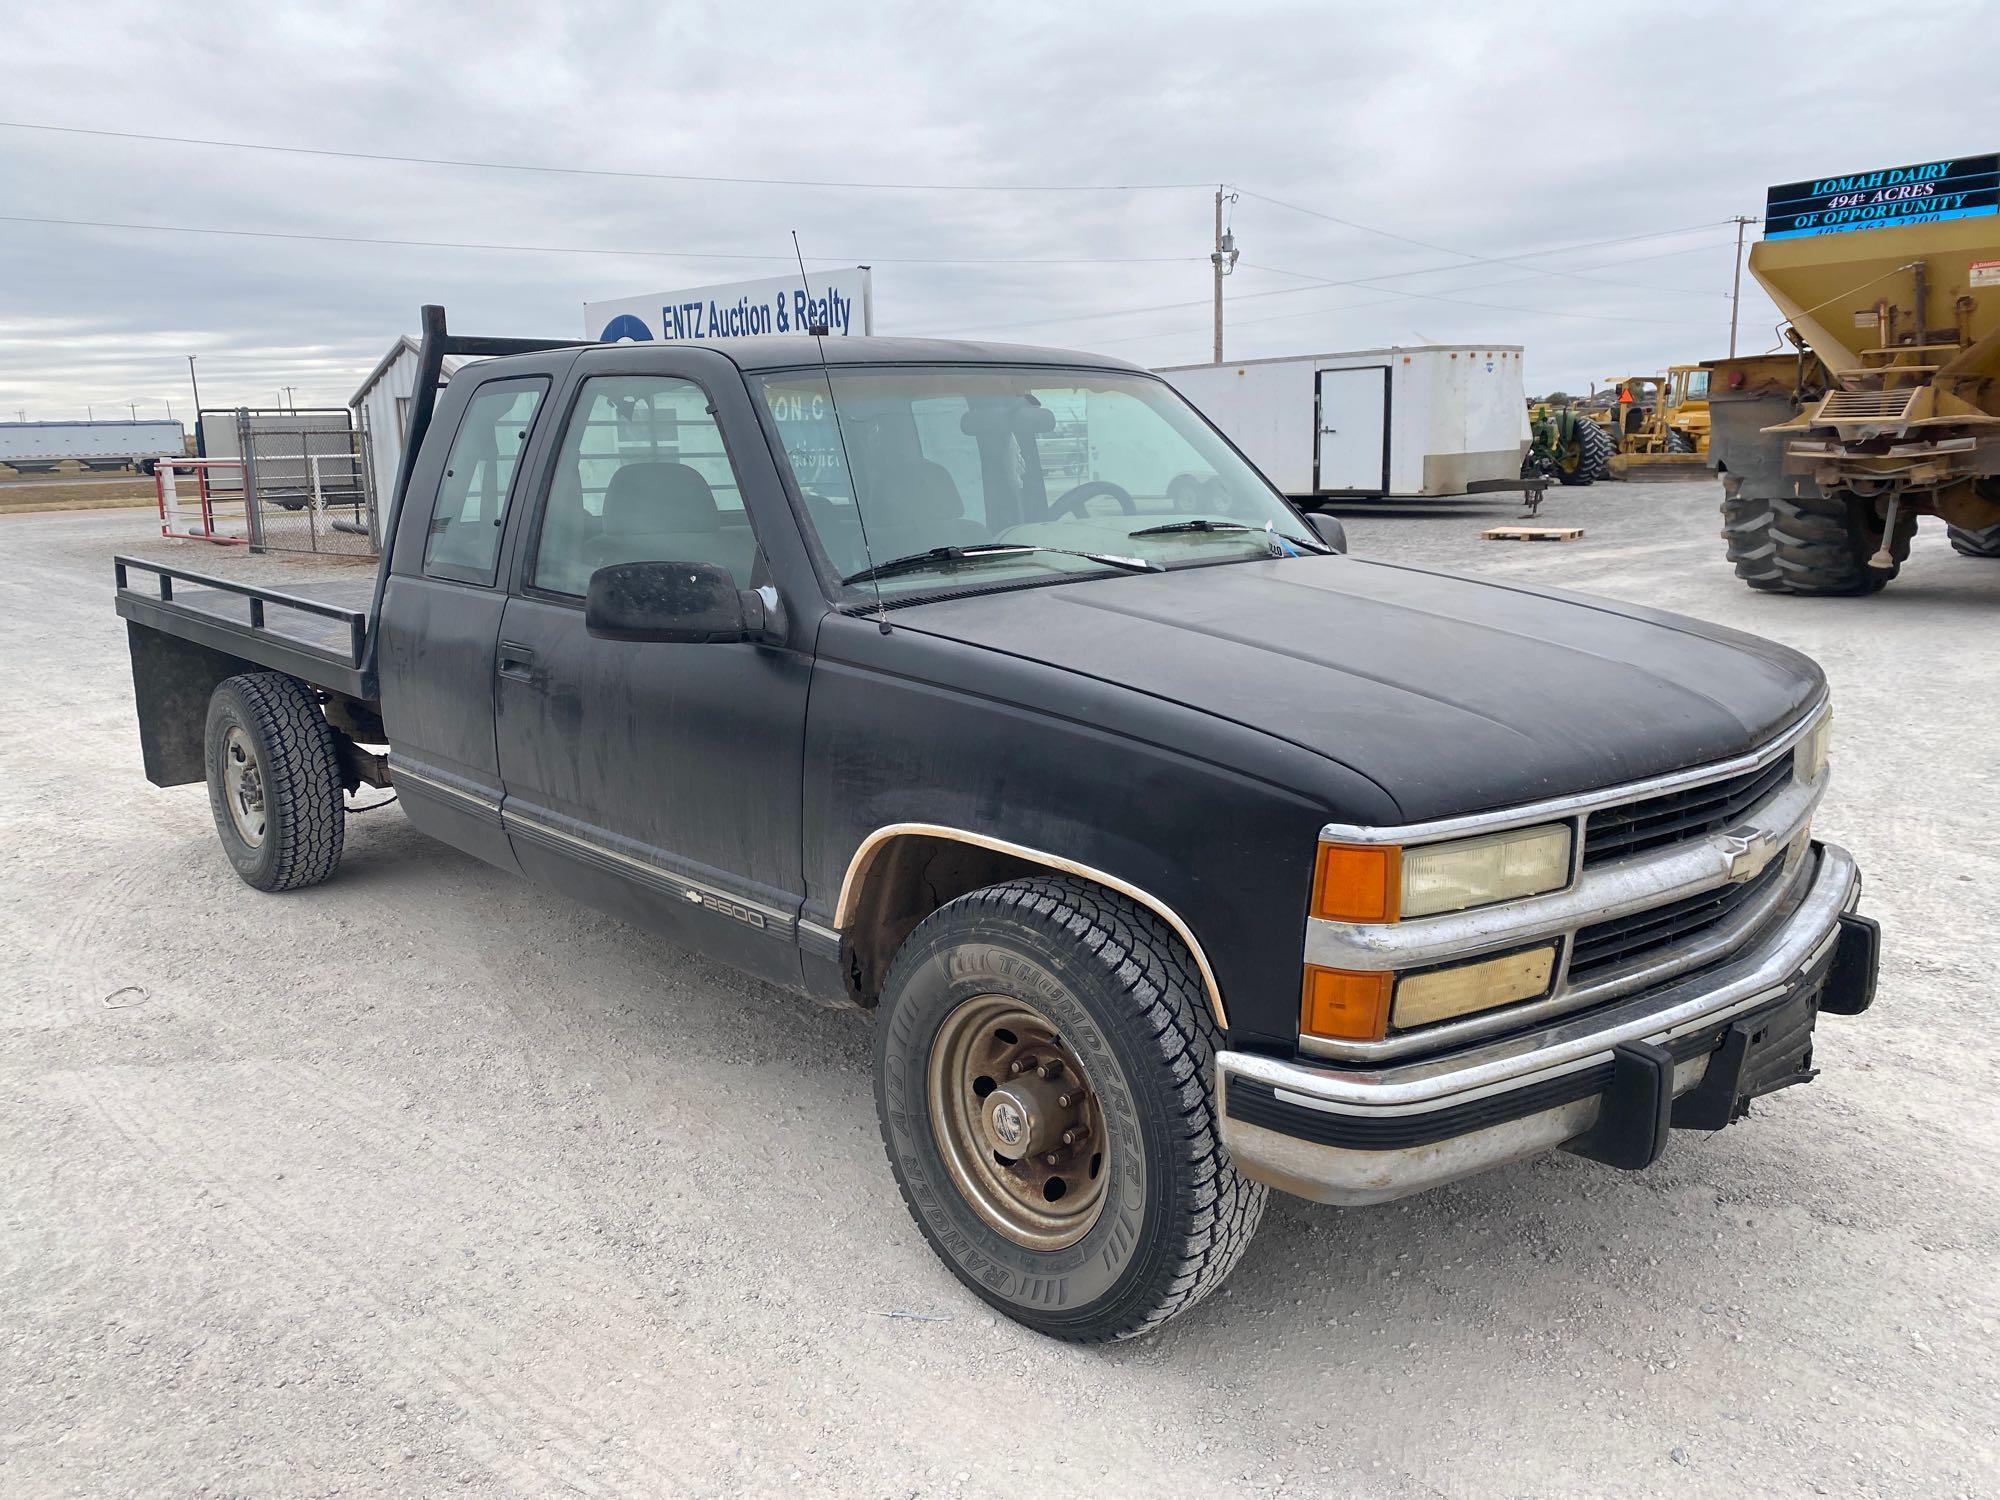 1995 CHEVY 2500 FLATBED PICKUP, 350, GAS, 5 SPEED,